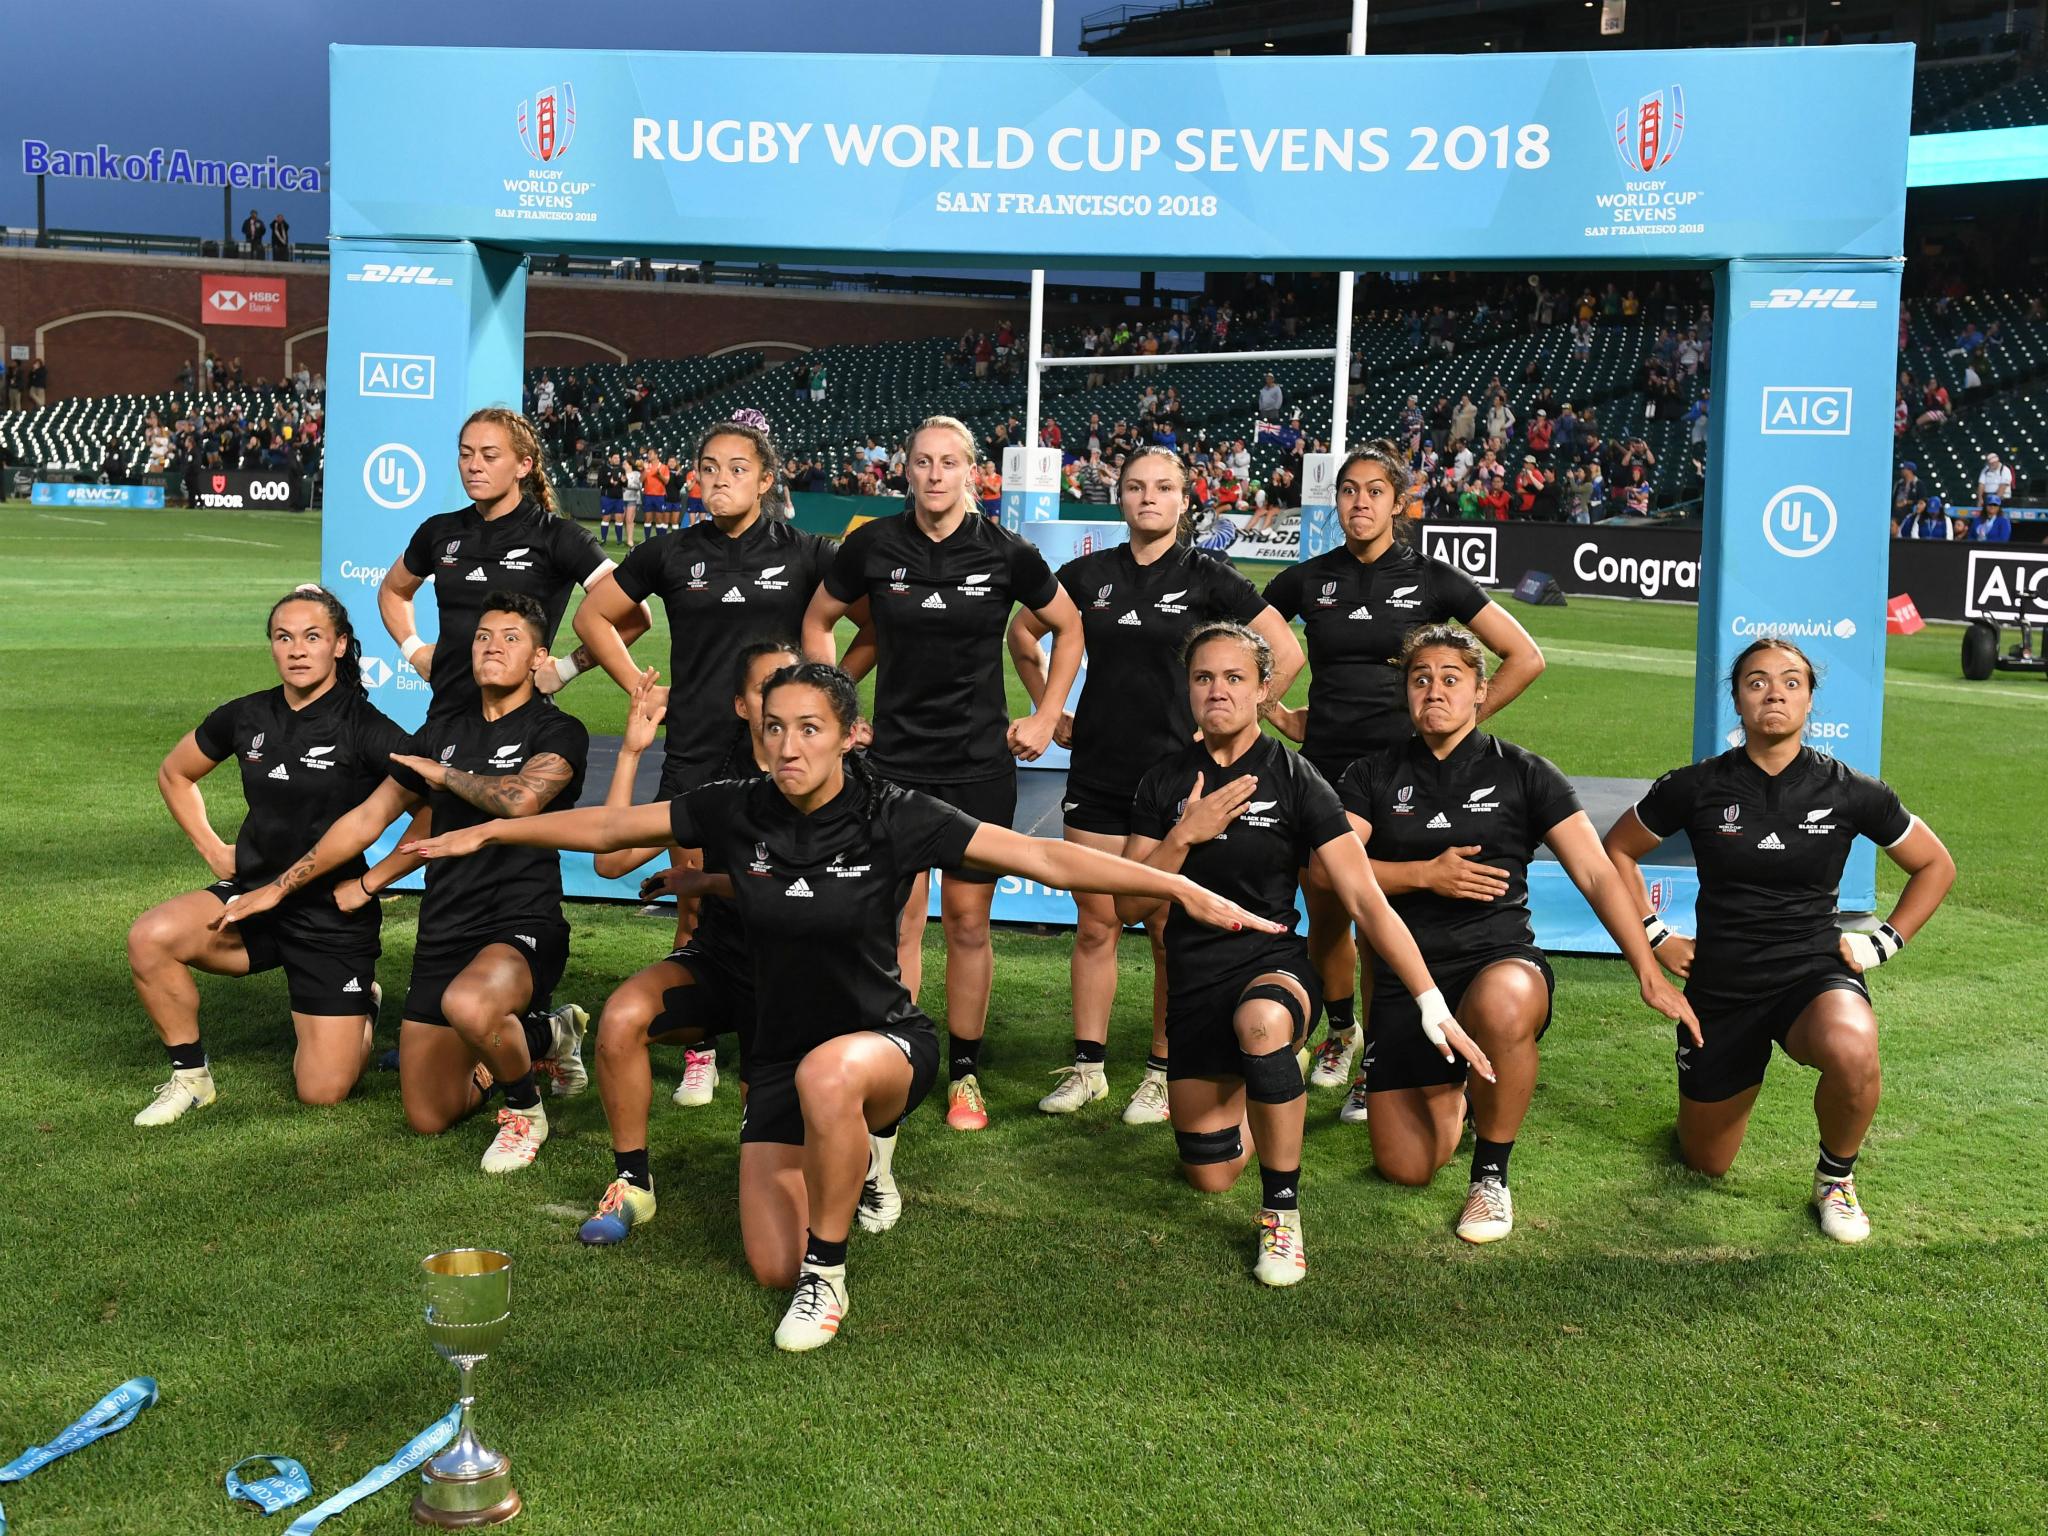 The All Blacks also faced criticism for not hailing achievements of the Black Ferns in spite of the world champions having won five of the last six Women’s World Cups